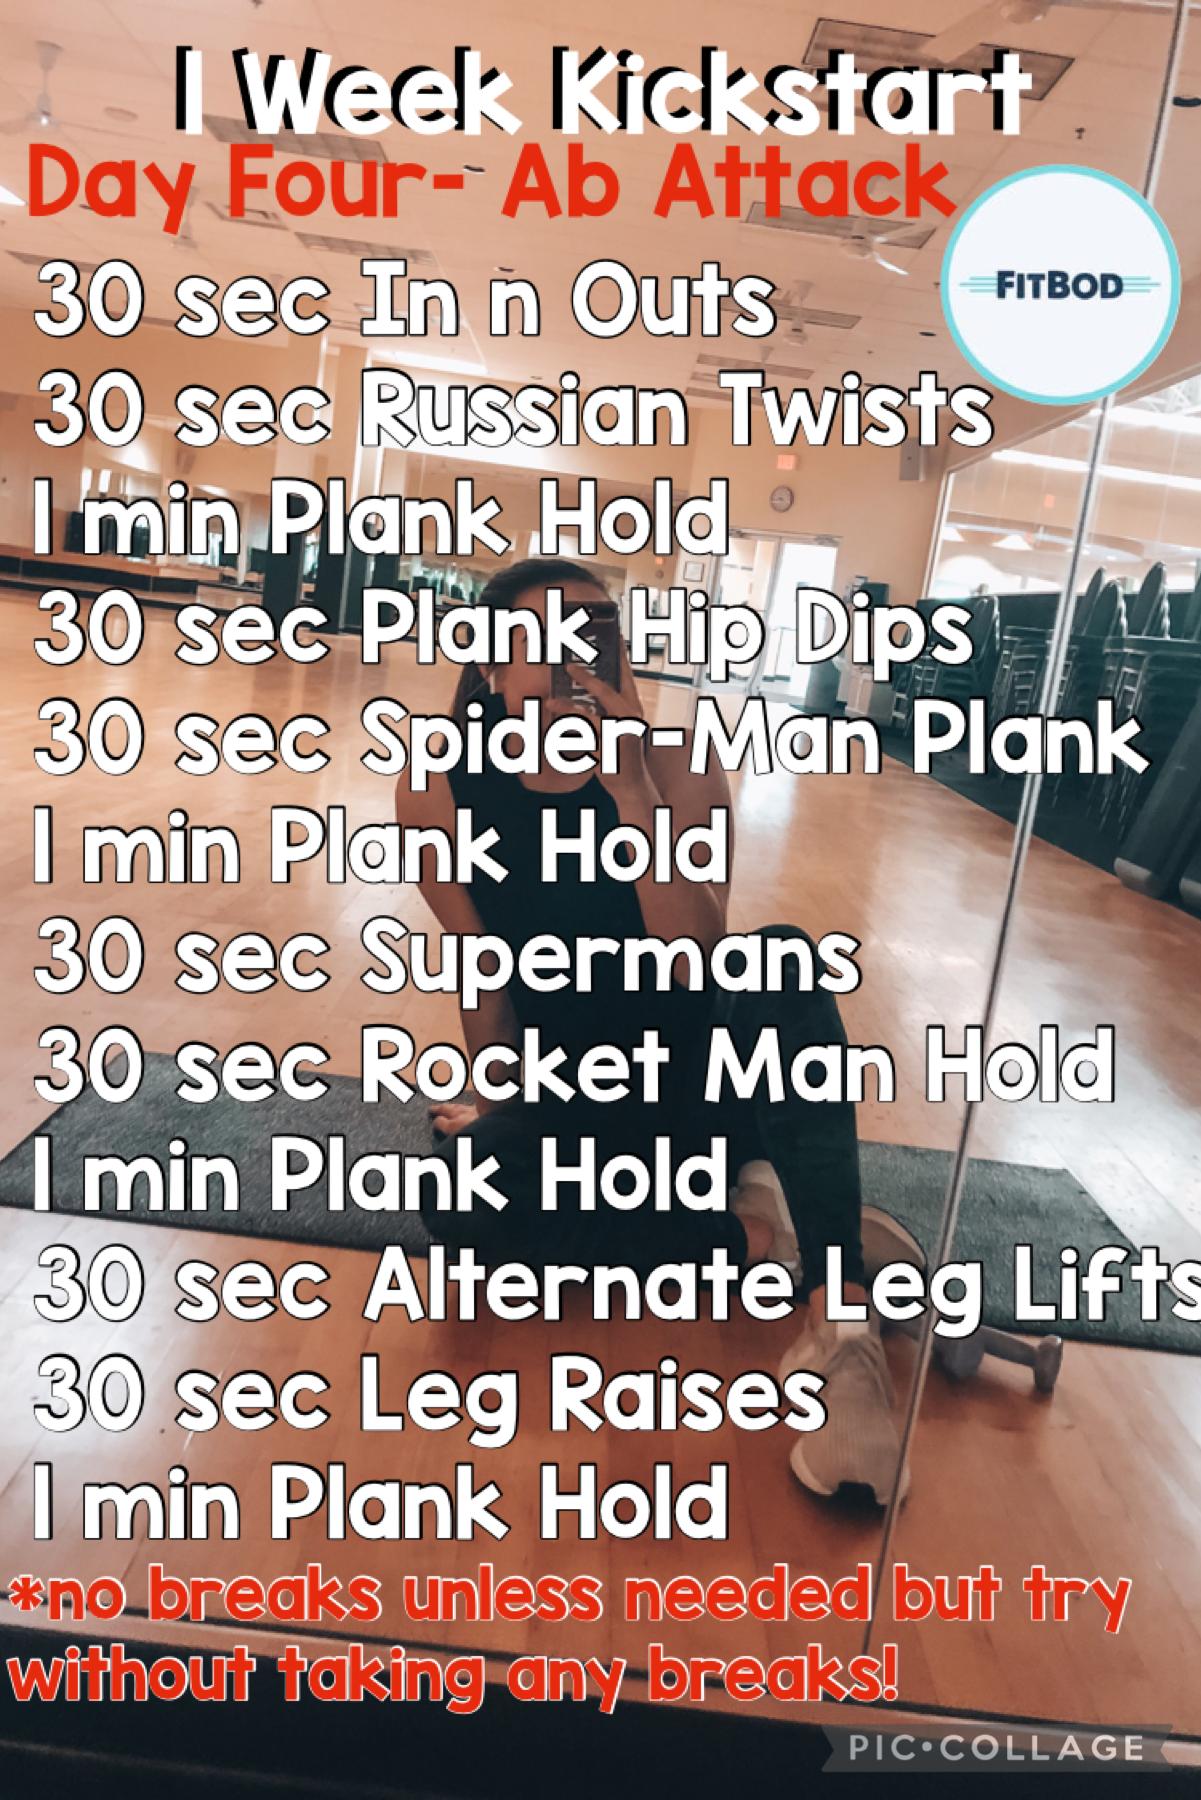 1 Week Kickstart- Day Four
AB ATTACK! This will burn but just stick through it, I know you can do it!